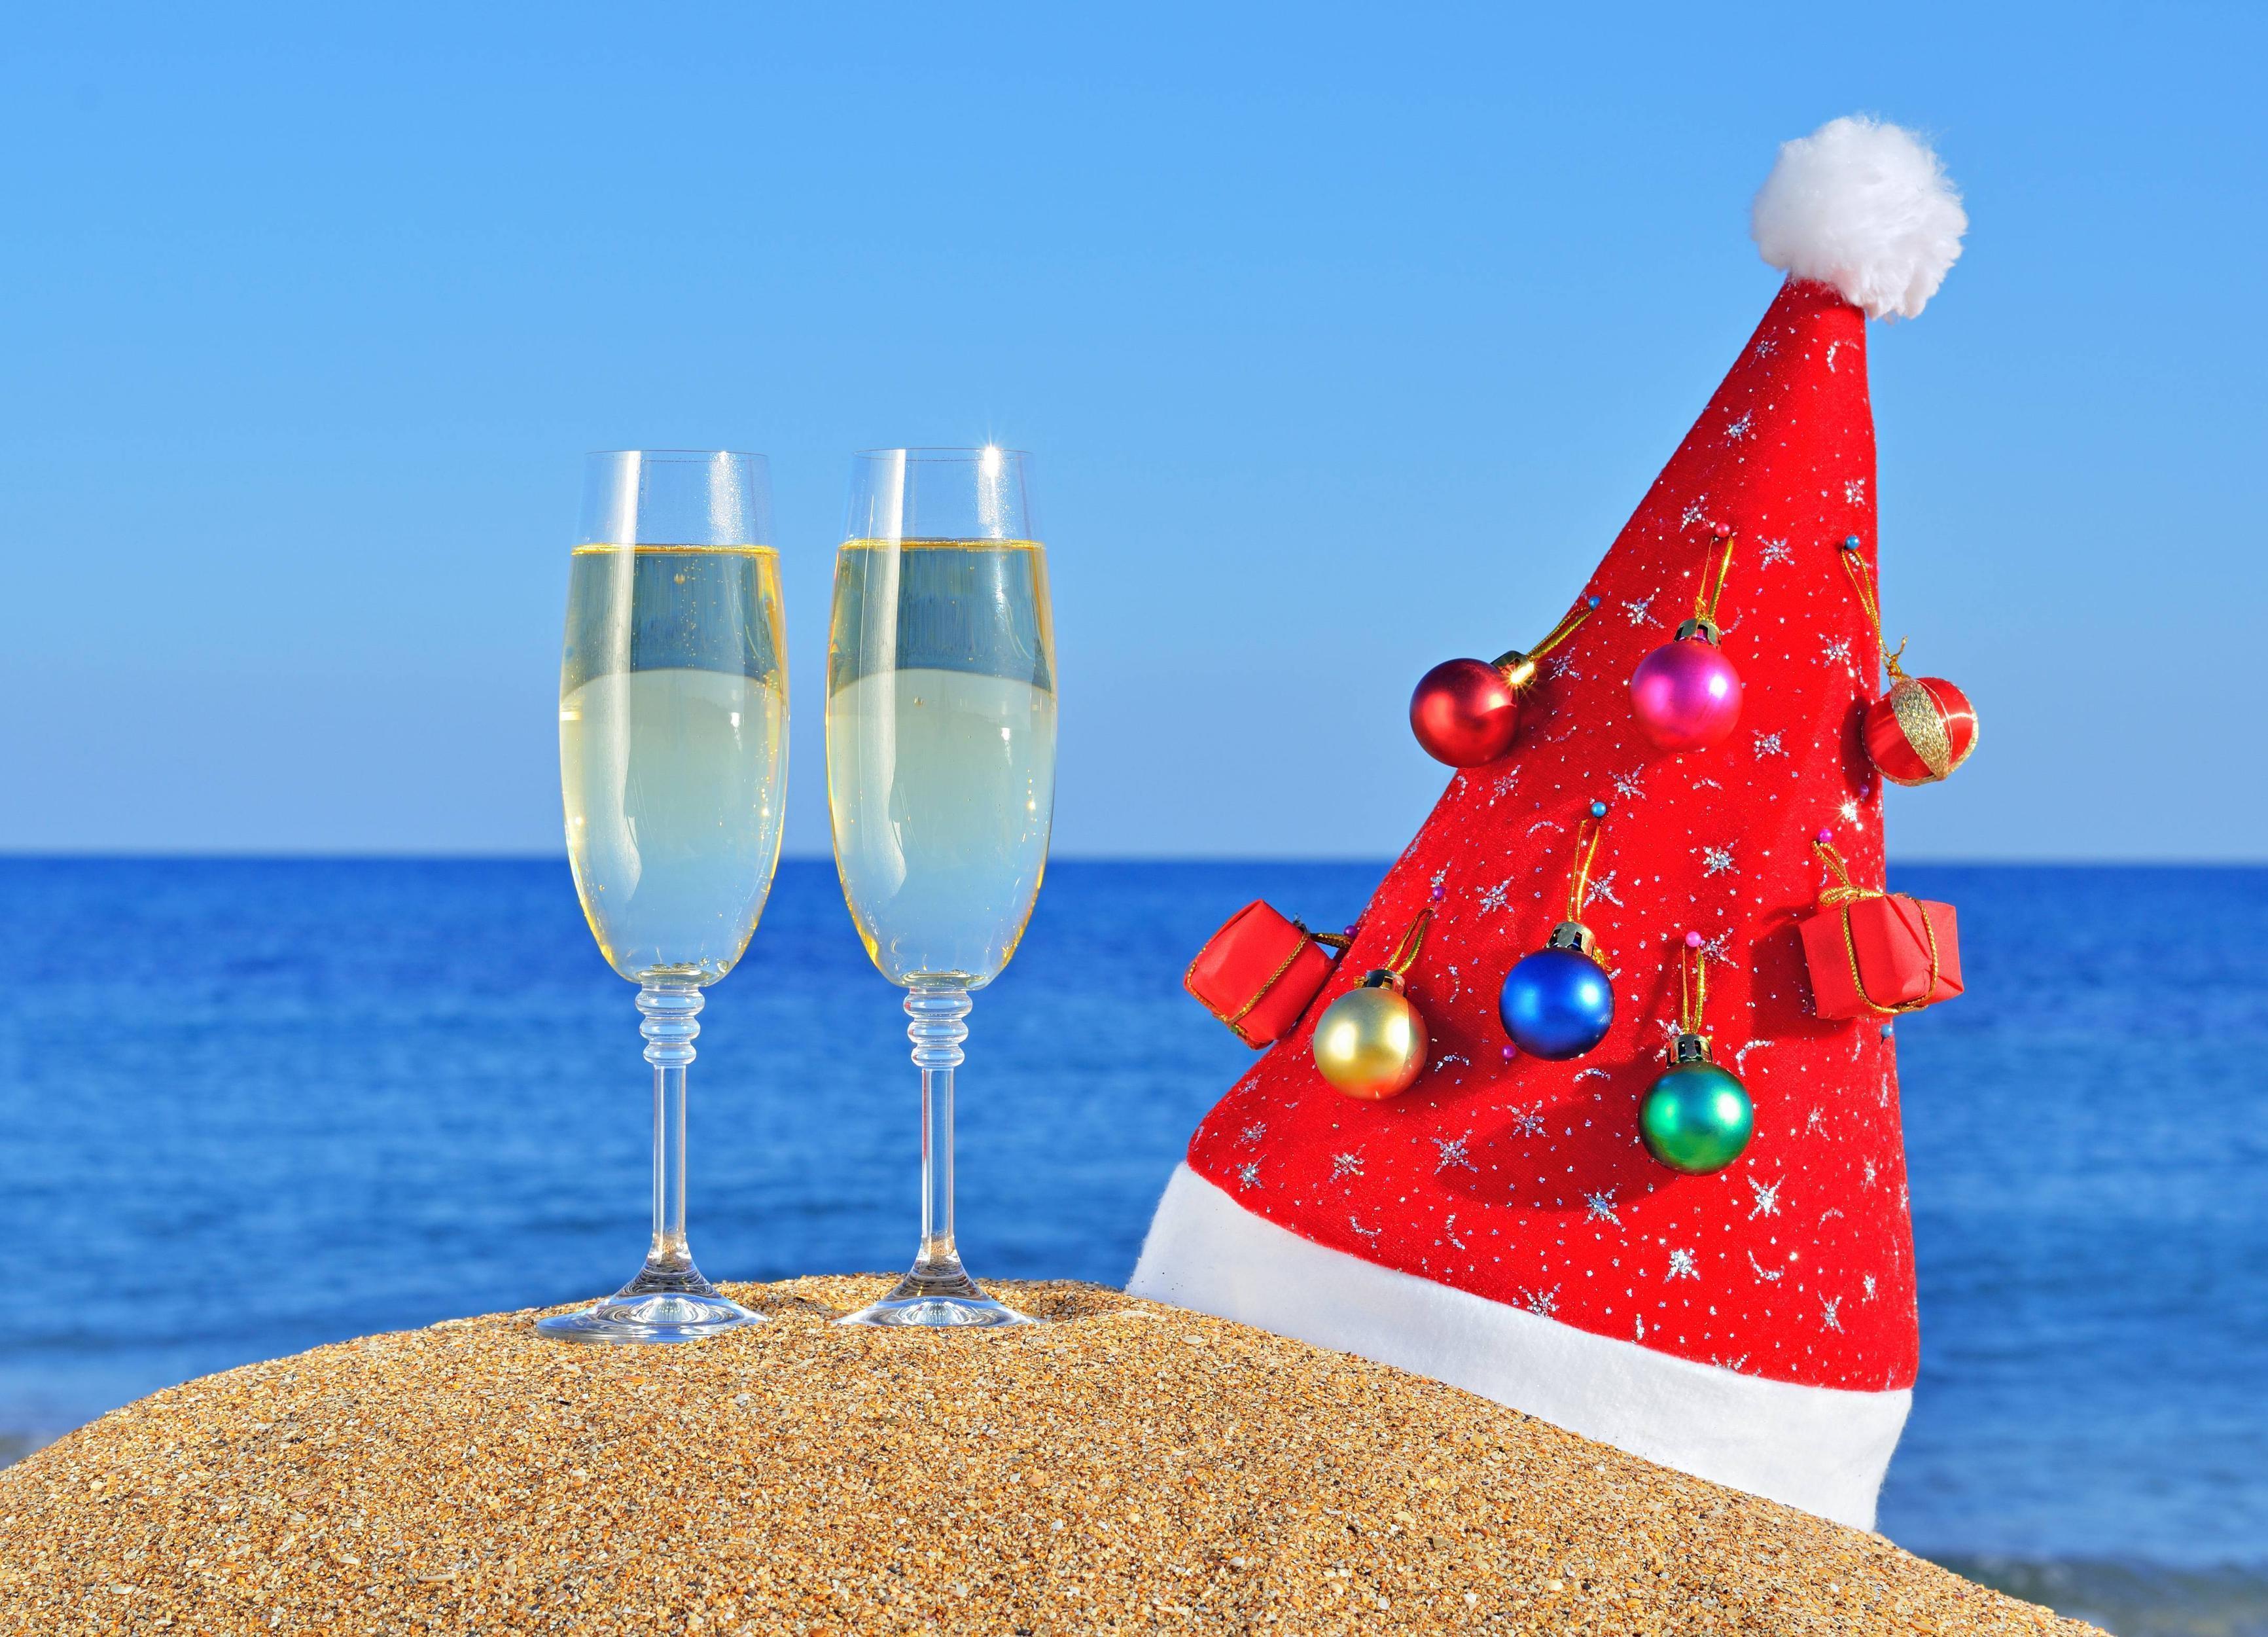 Download wallpaper holiday, New Year, Christmas, beach free